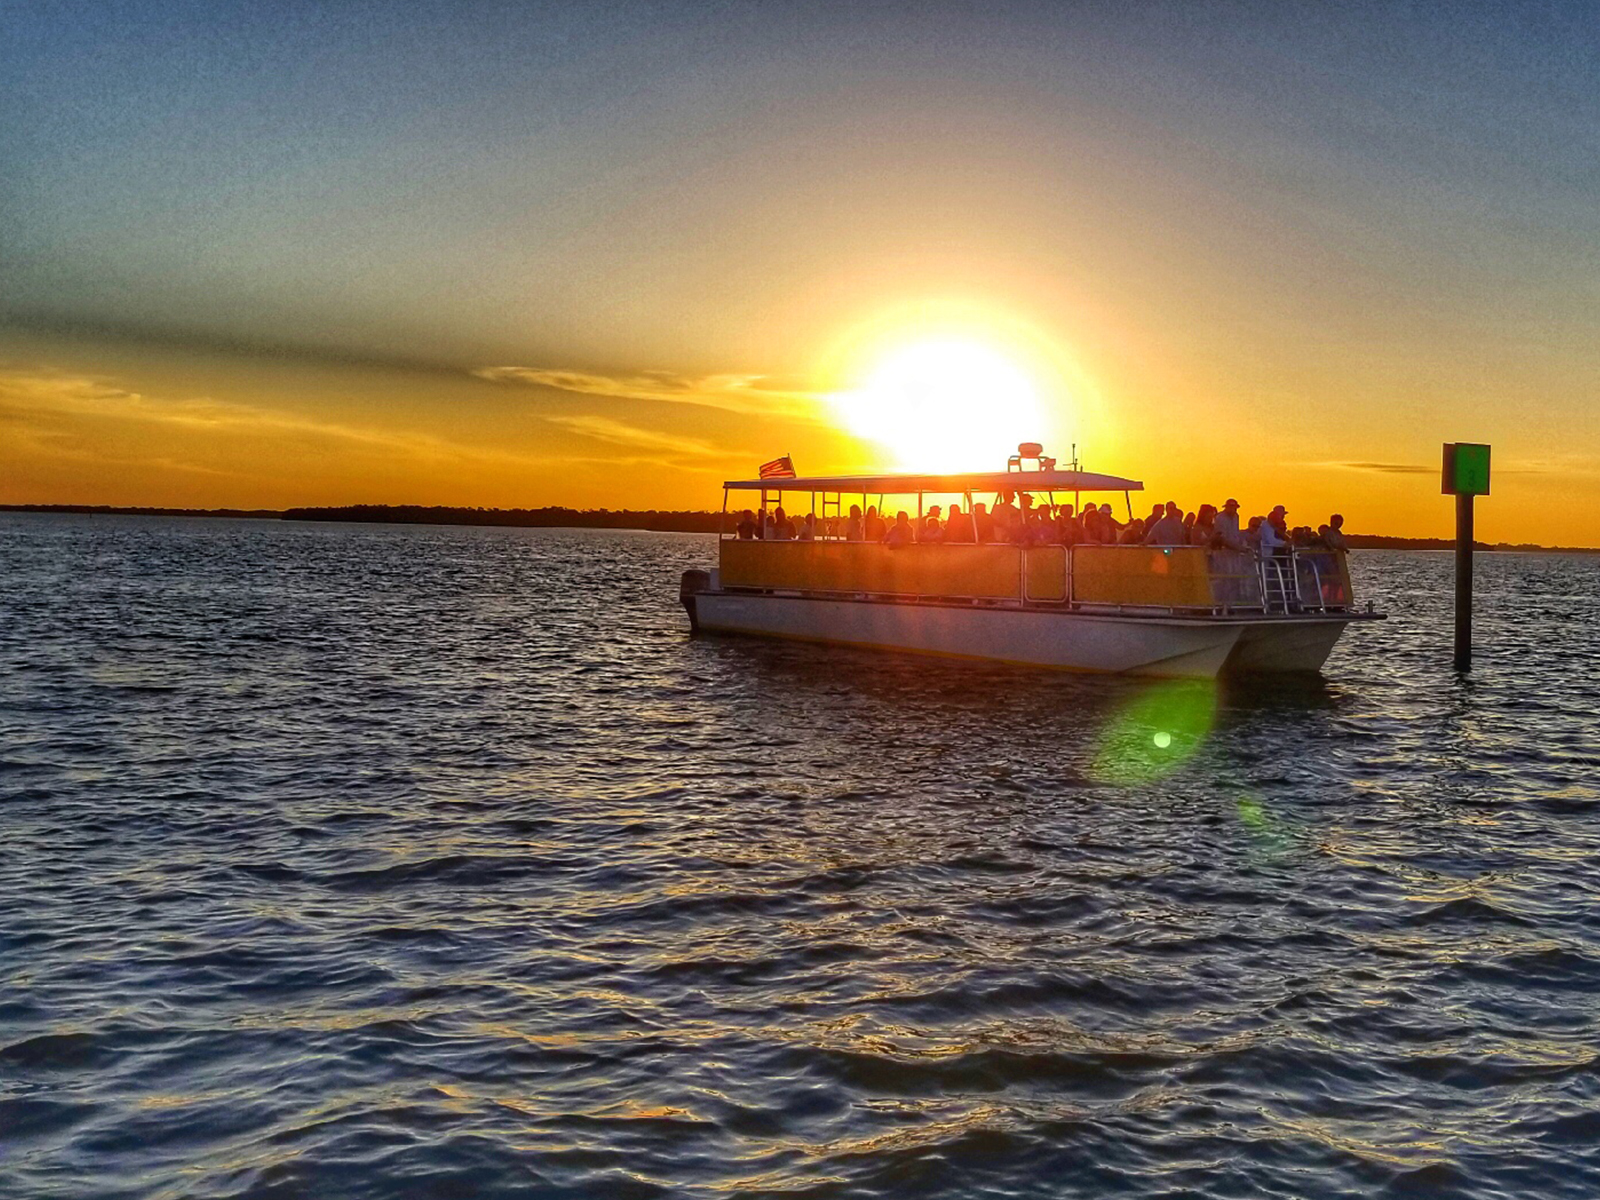 boat trips fort myers